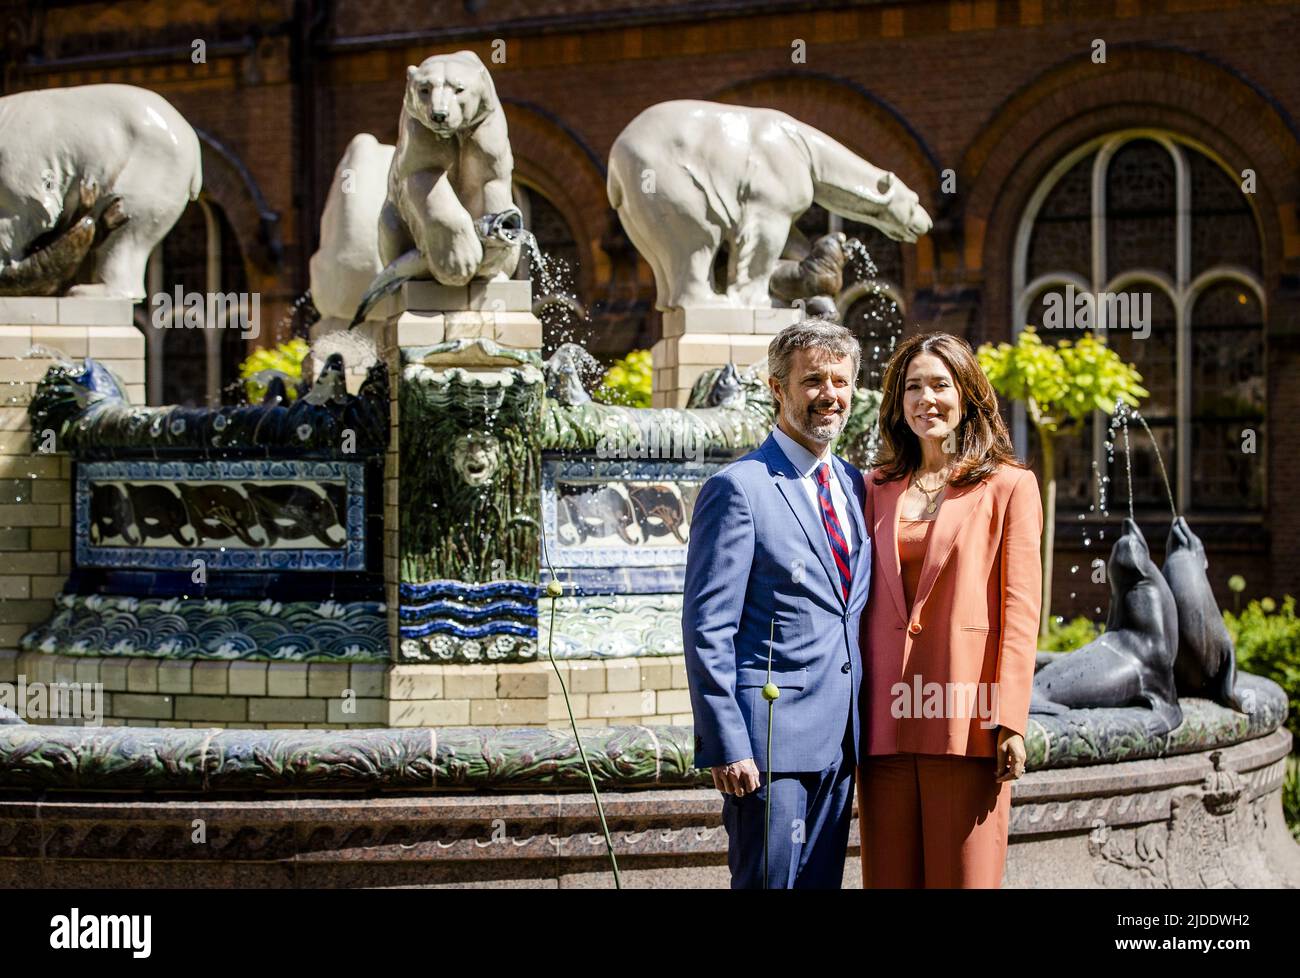 2022-06-20 16:02:20 THE HAGUE - Crown Prince Frederik and Crown Princess Mary of Denmark view a fountain with seals and polar bears, made of royal Danish porcelain, in the courtyard of the Peace Palace during their two-day trade visit to the Netherlands. The Danish Crown Prince couple led a trade delegation focused on energy transition and digital healthcare. ANP SEM VAN DER WAL netherlands out - belgium out Stock Photo